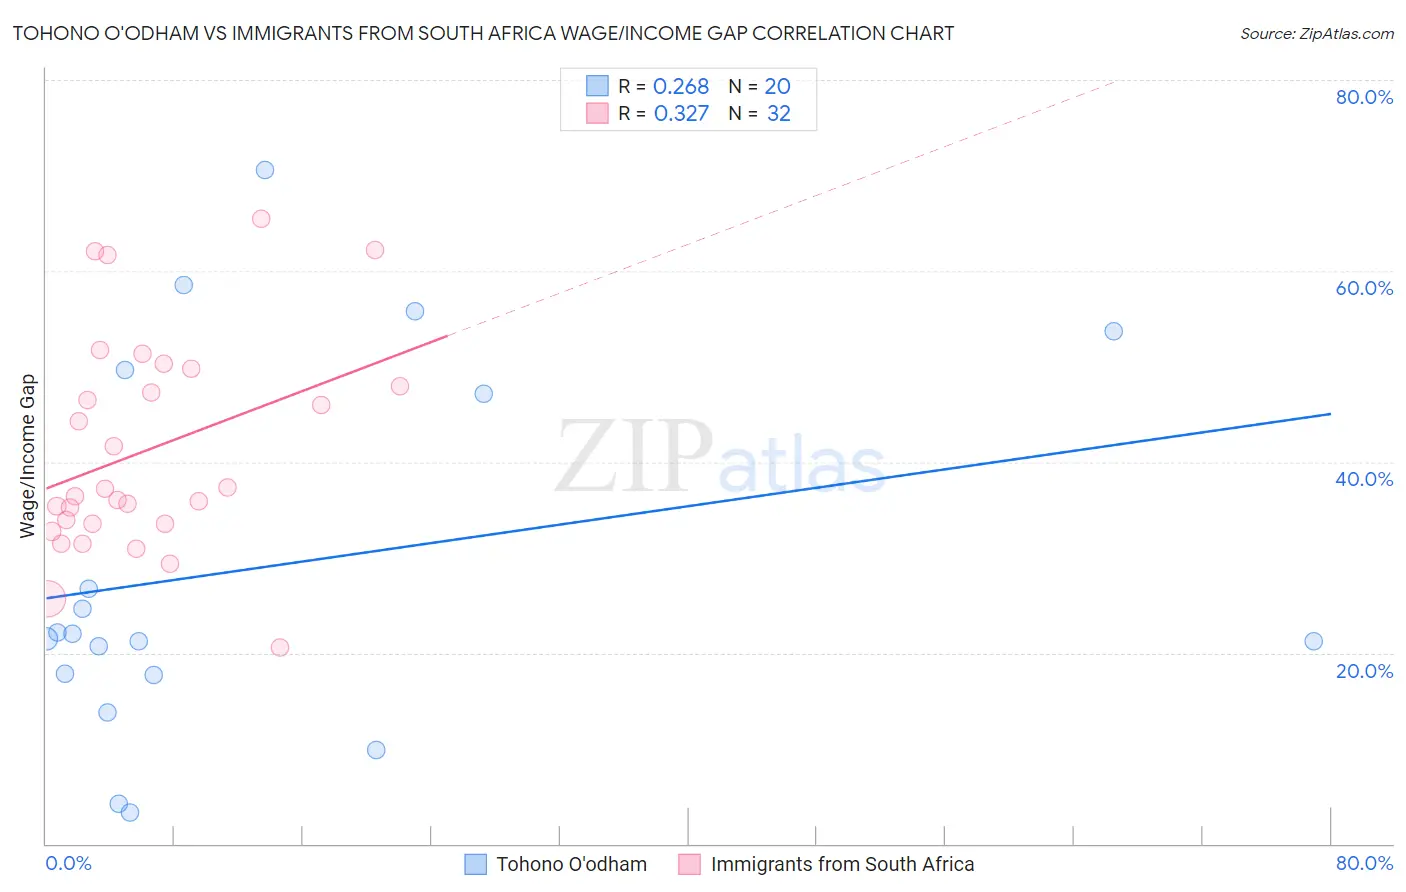 Tohono O'odham vs Immigrants from South Africa Wage/Income Gap